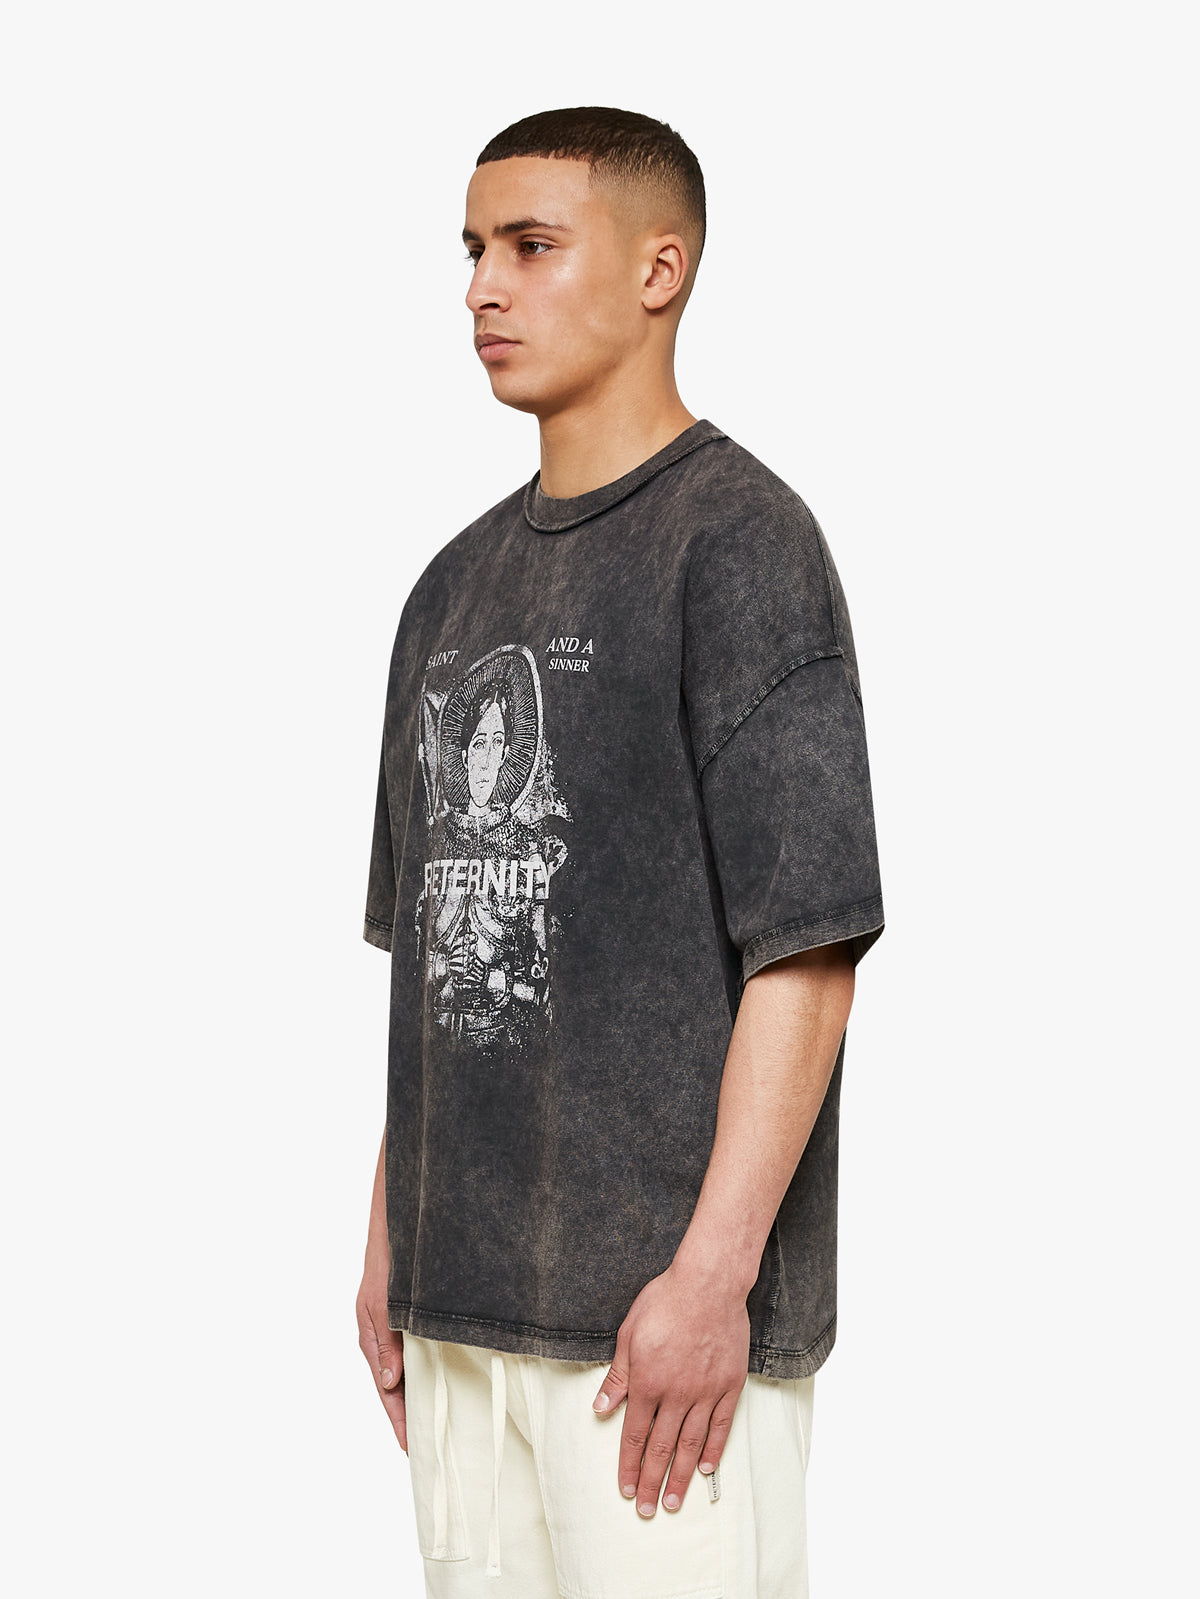 T-SHIRT SAINT AND SINNER - WASHED GREY